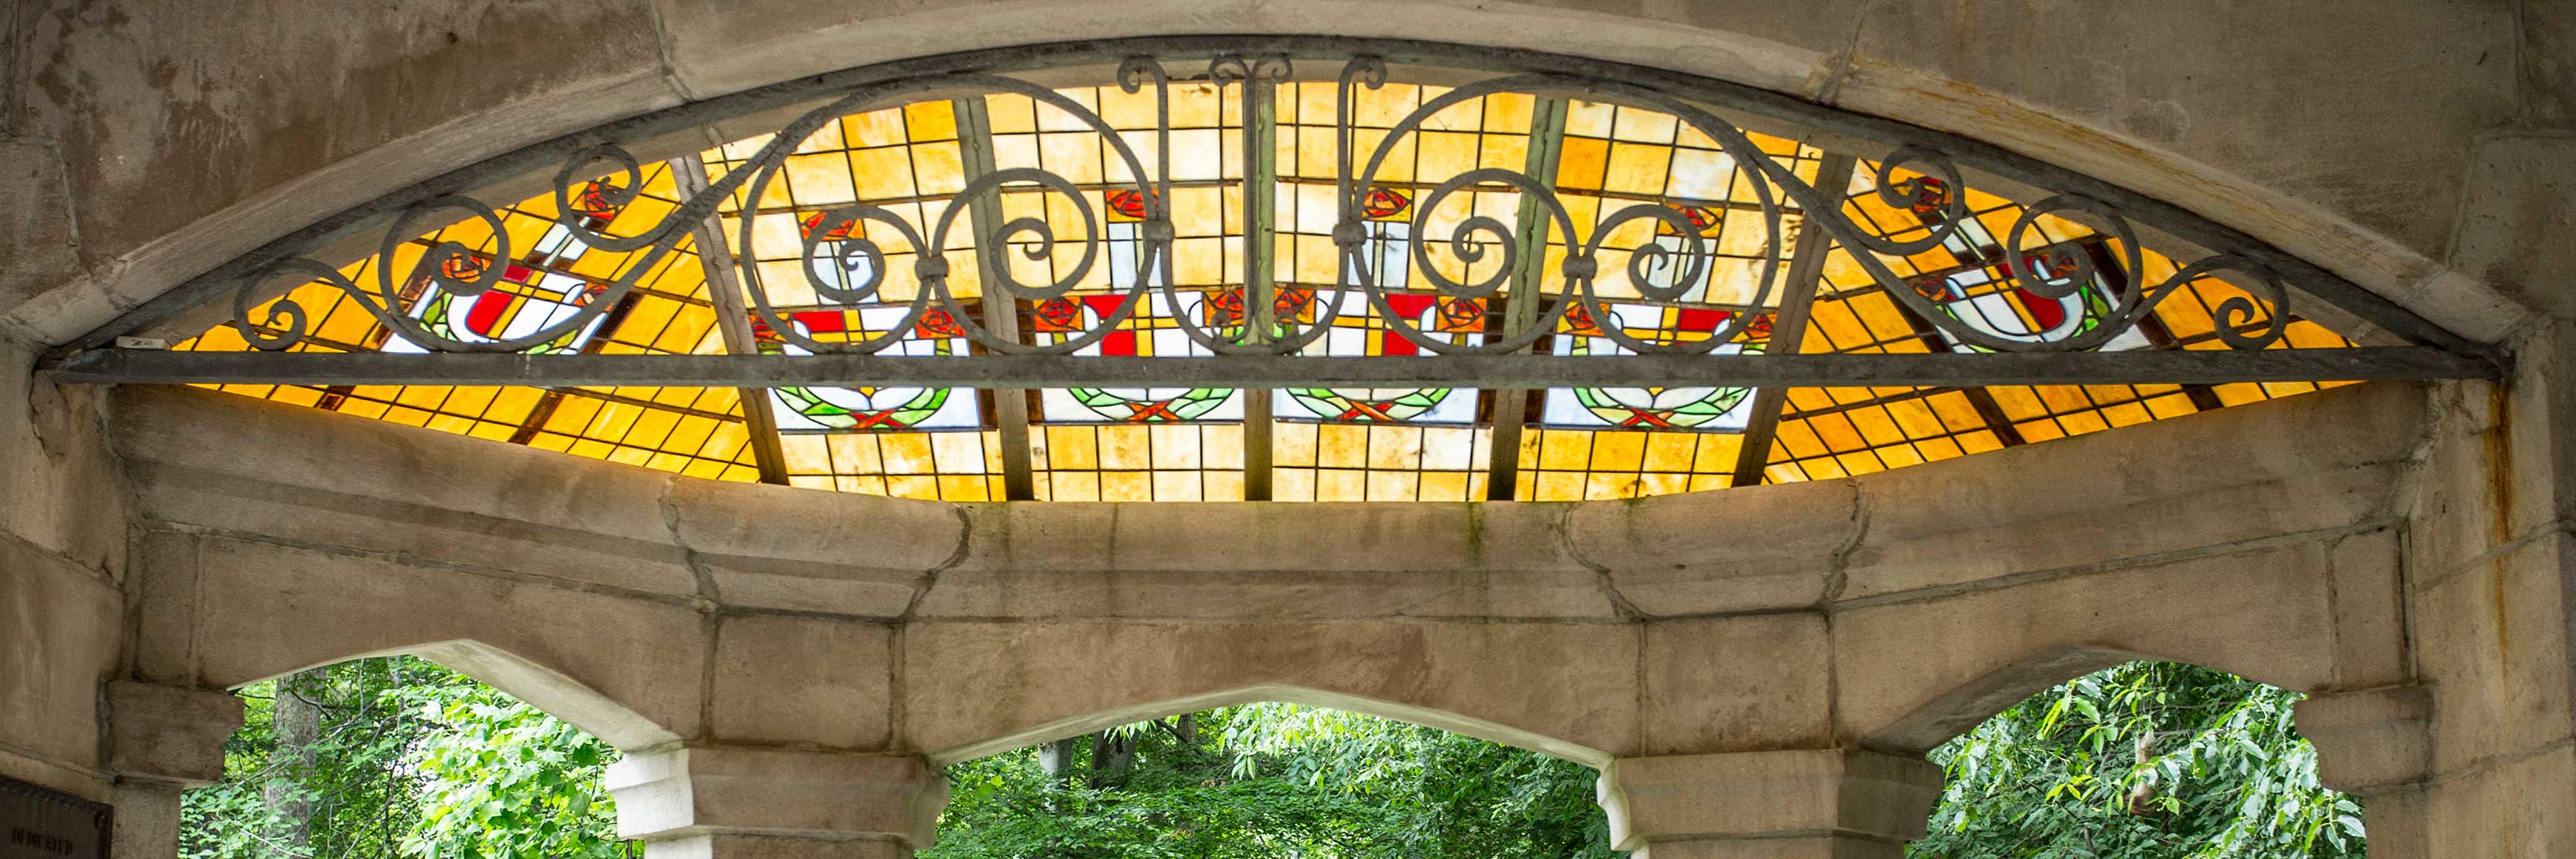 A picture of the stained glass in the Wells House gazebo, which includes the IU trident.